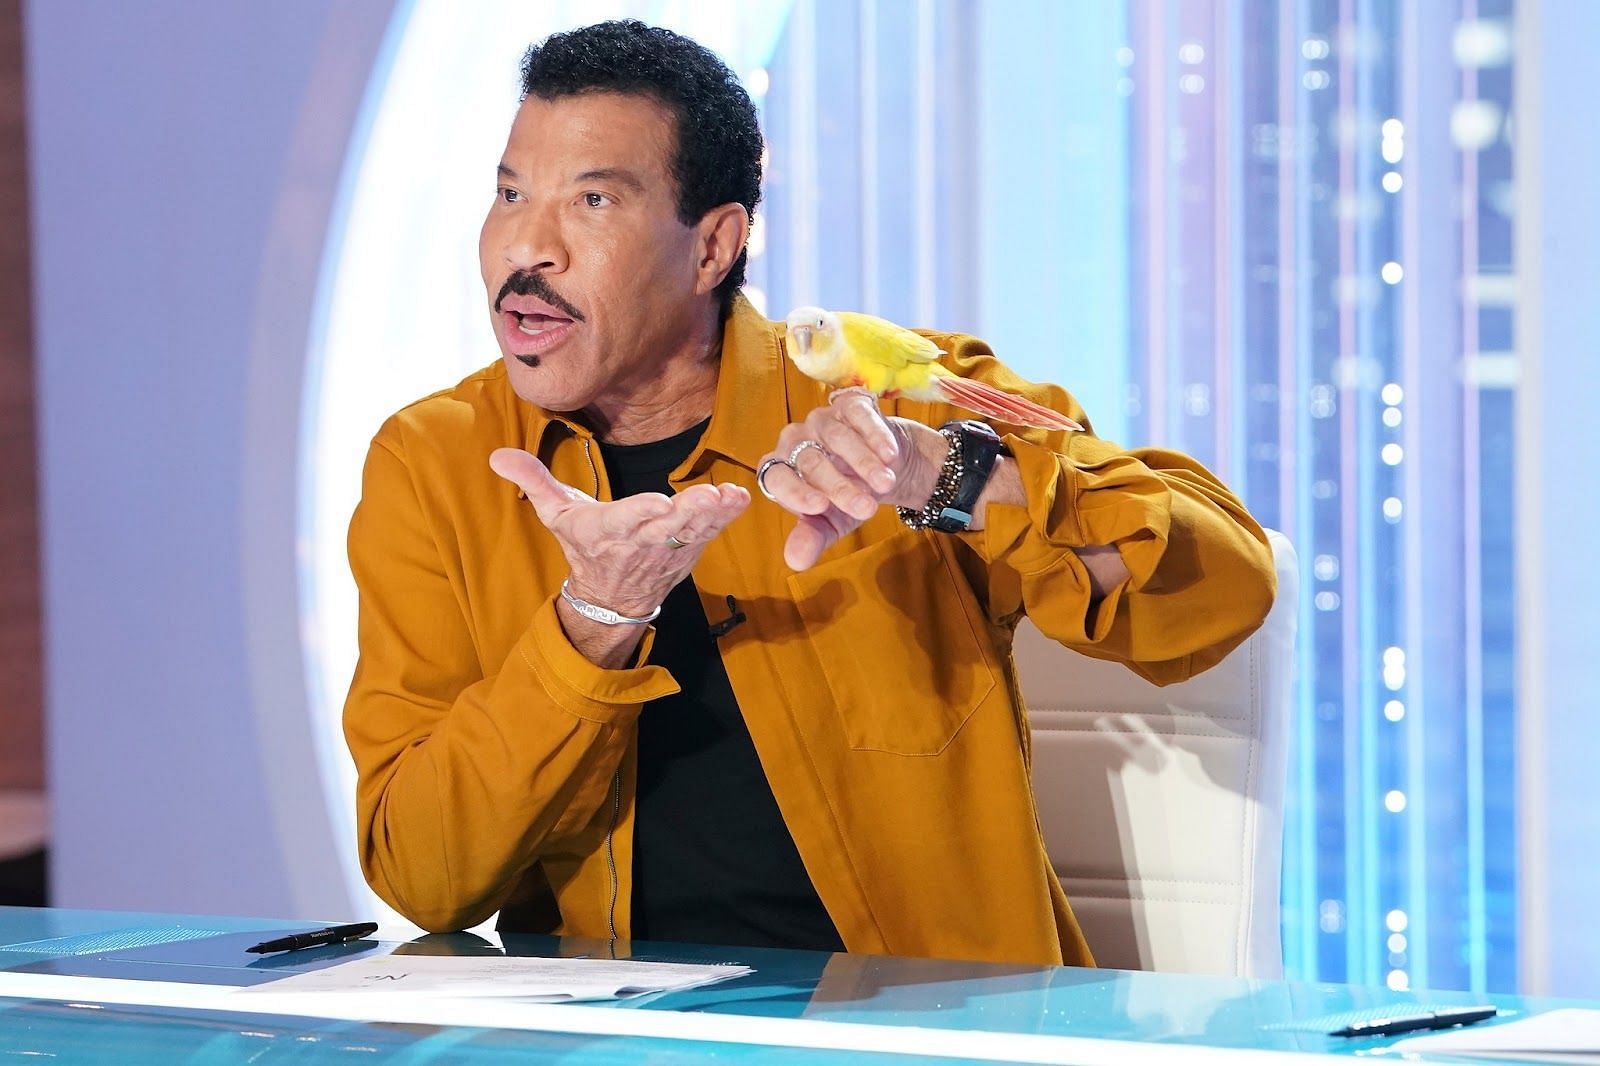 What is the net worth of Lionel Richie?